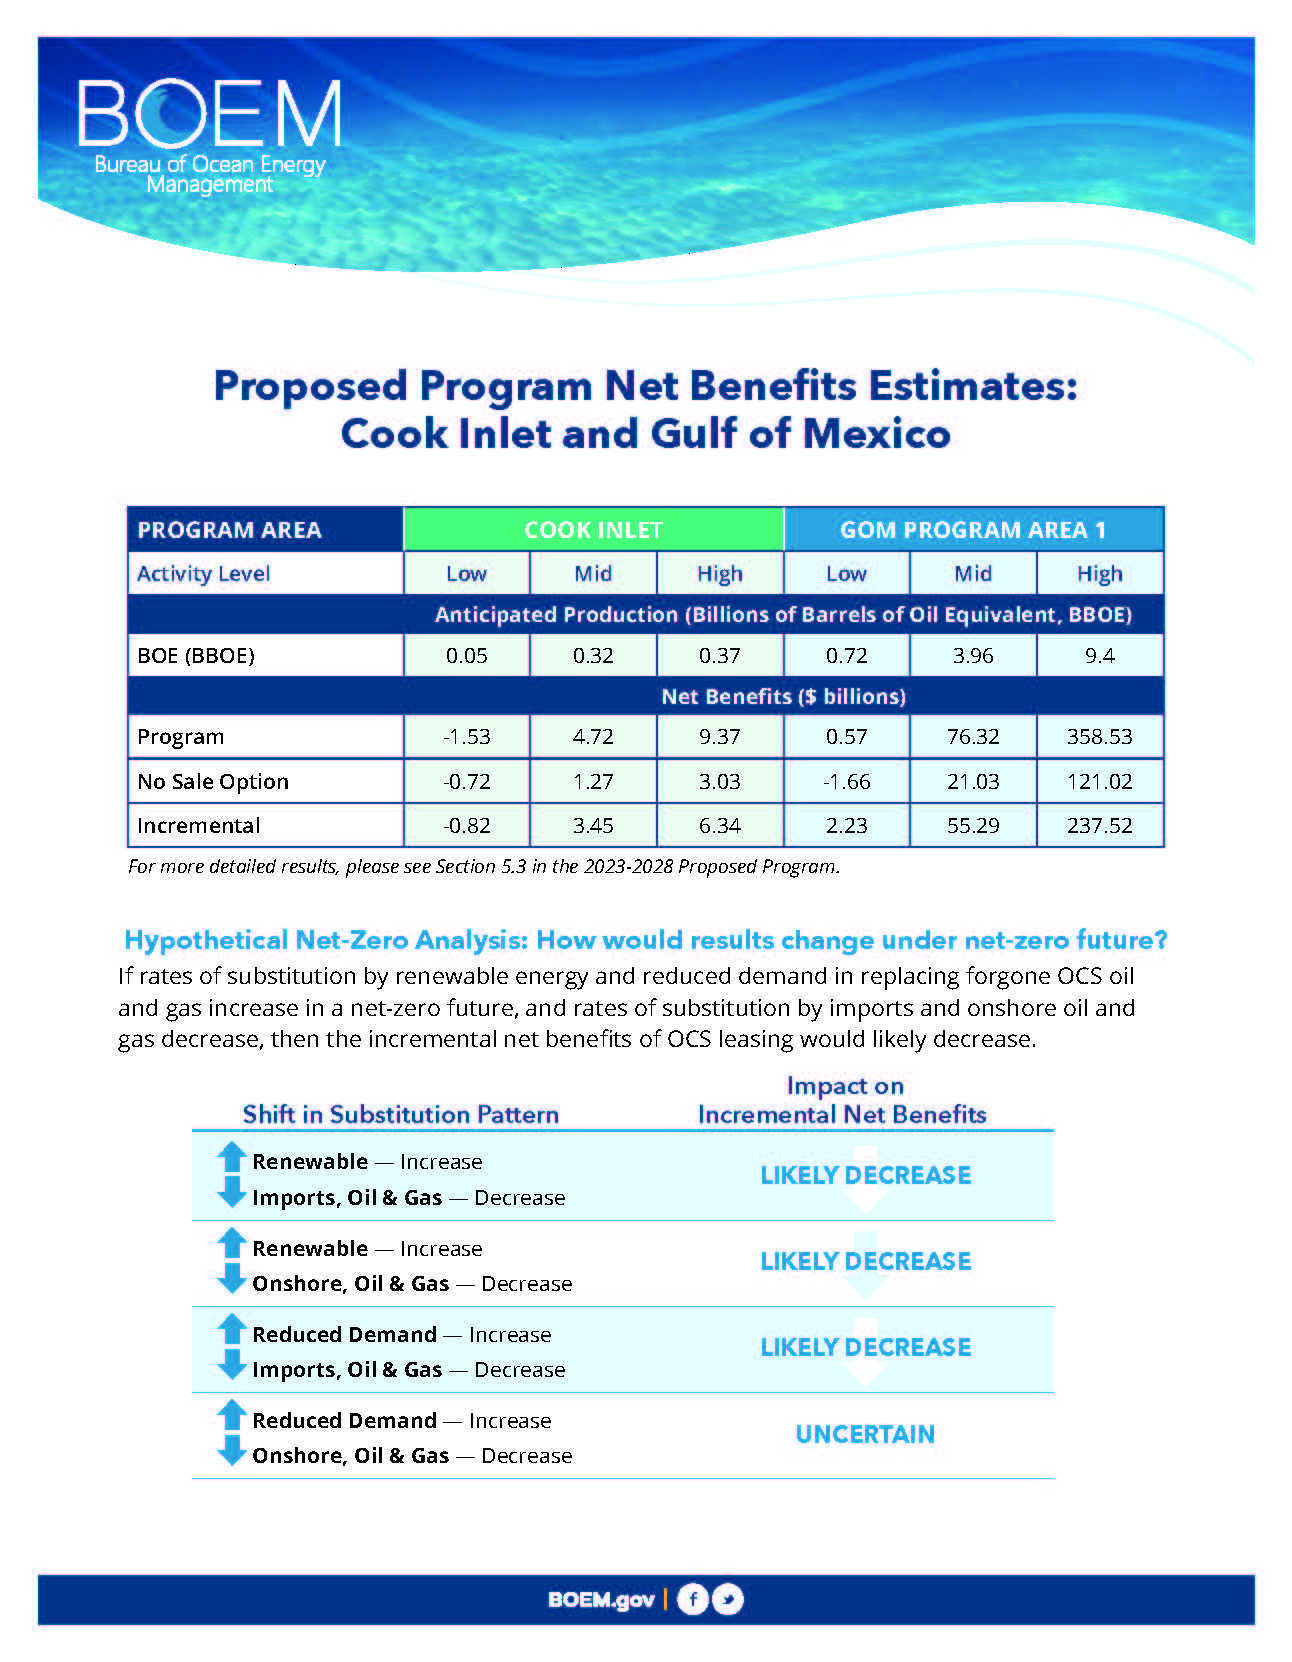 Proposed Program Net Benefits Estimates: Cook Inlet and Gulf of Mexico